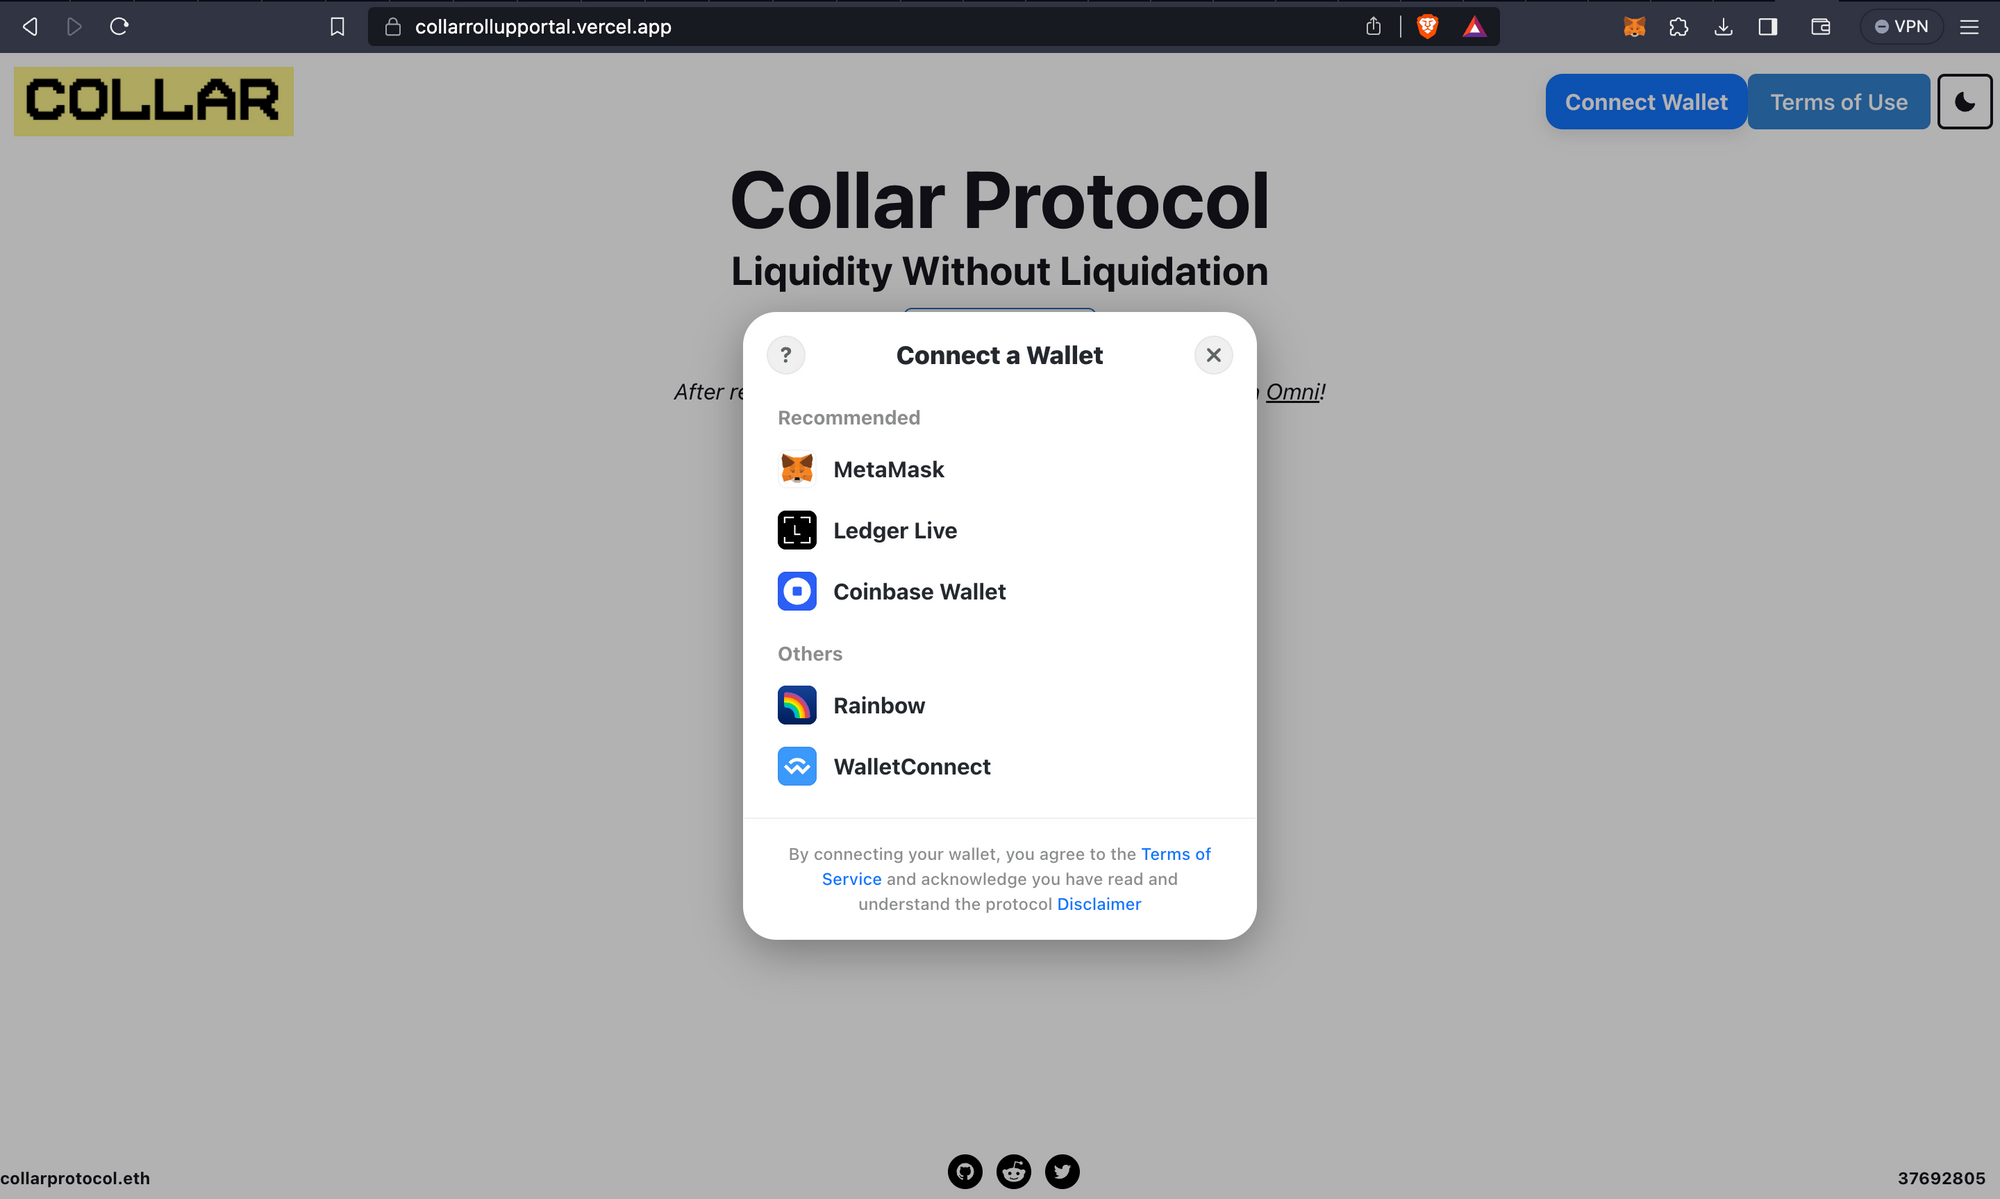 Connect Your Wallet on Collar Protocol